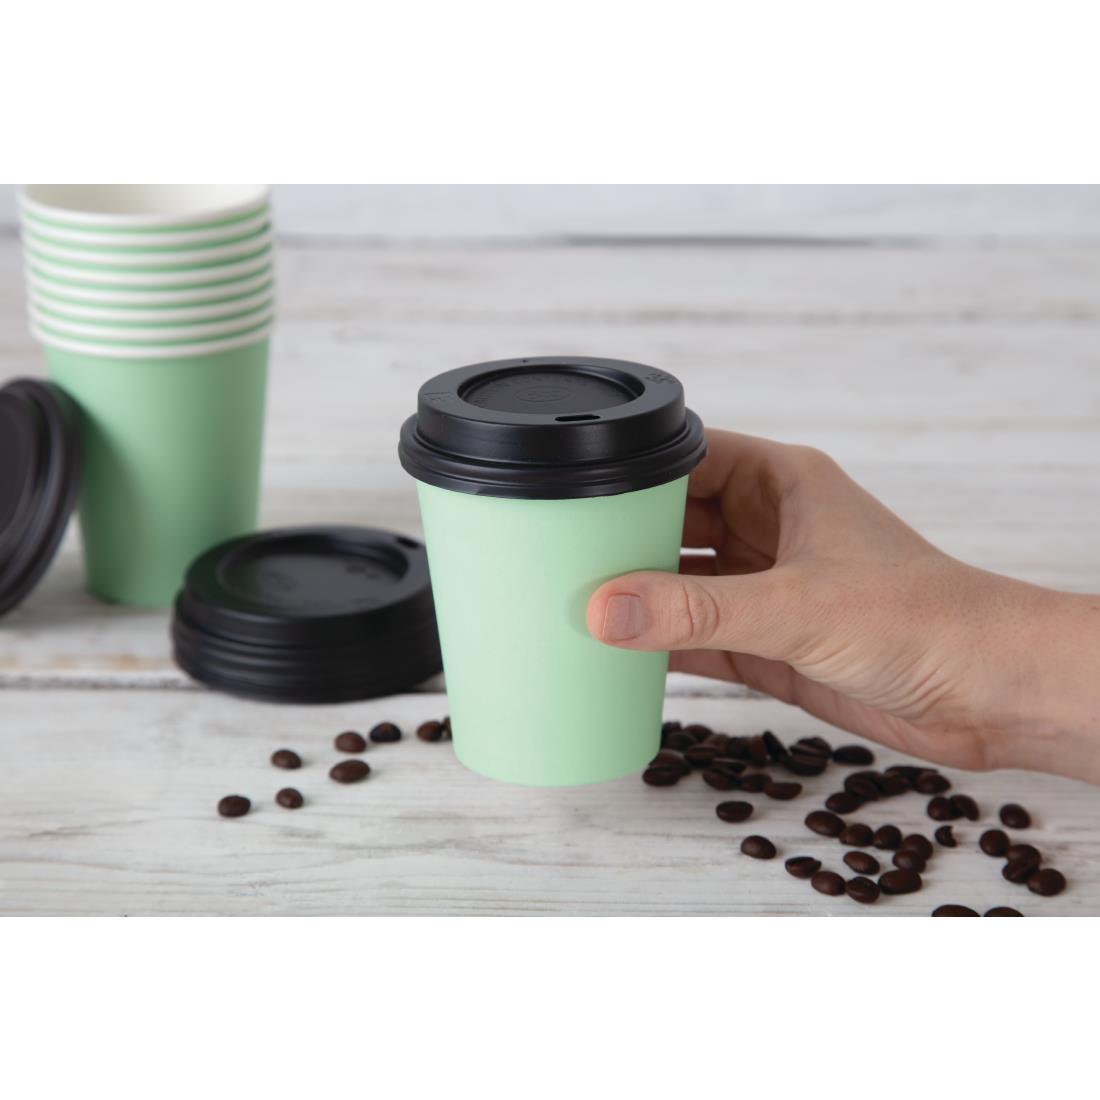 Fiesta Recyclable Coffee Cups Single Wall Turquoise 225ml / 8oz (Pack of 1000) - GP403  - 5